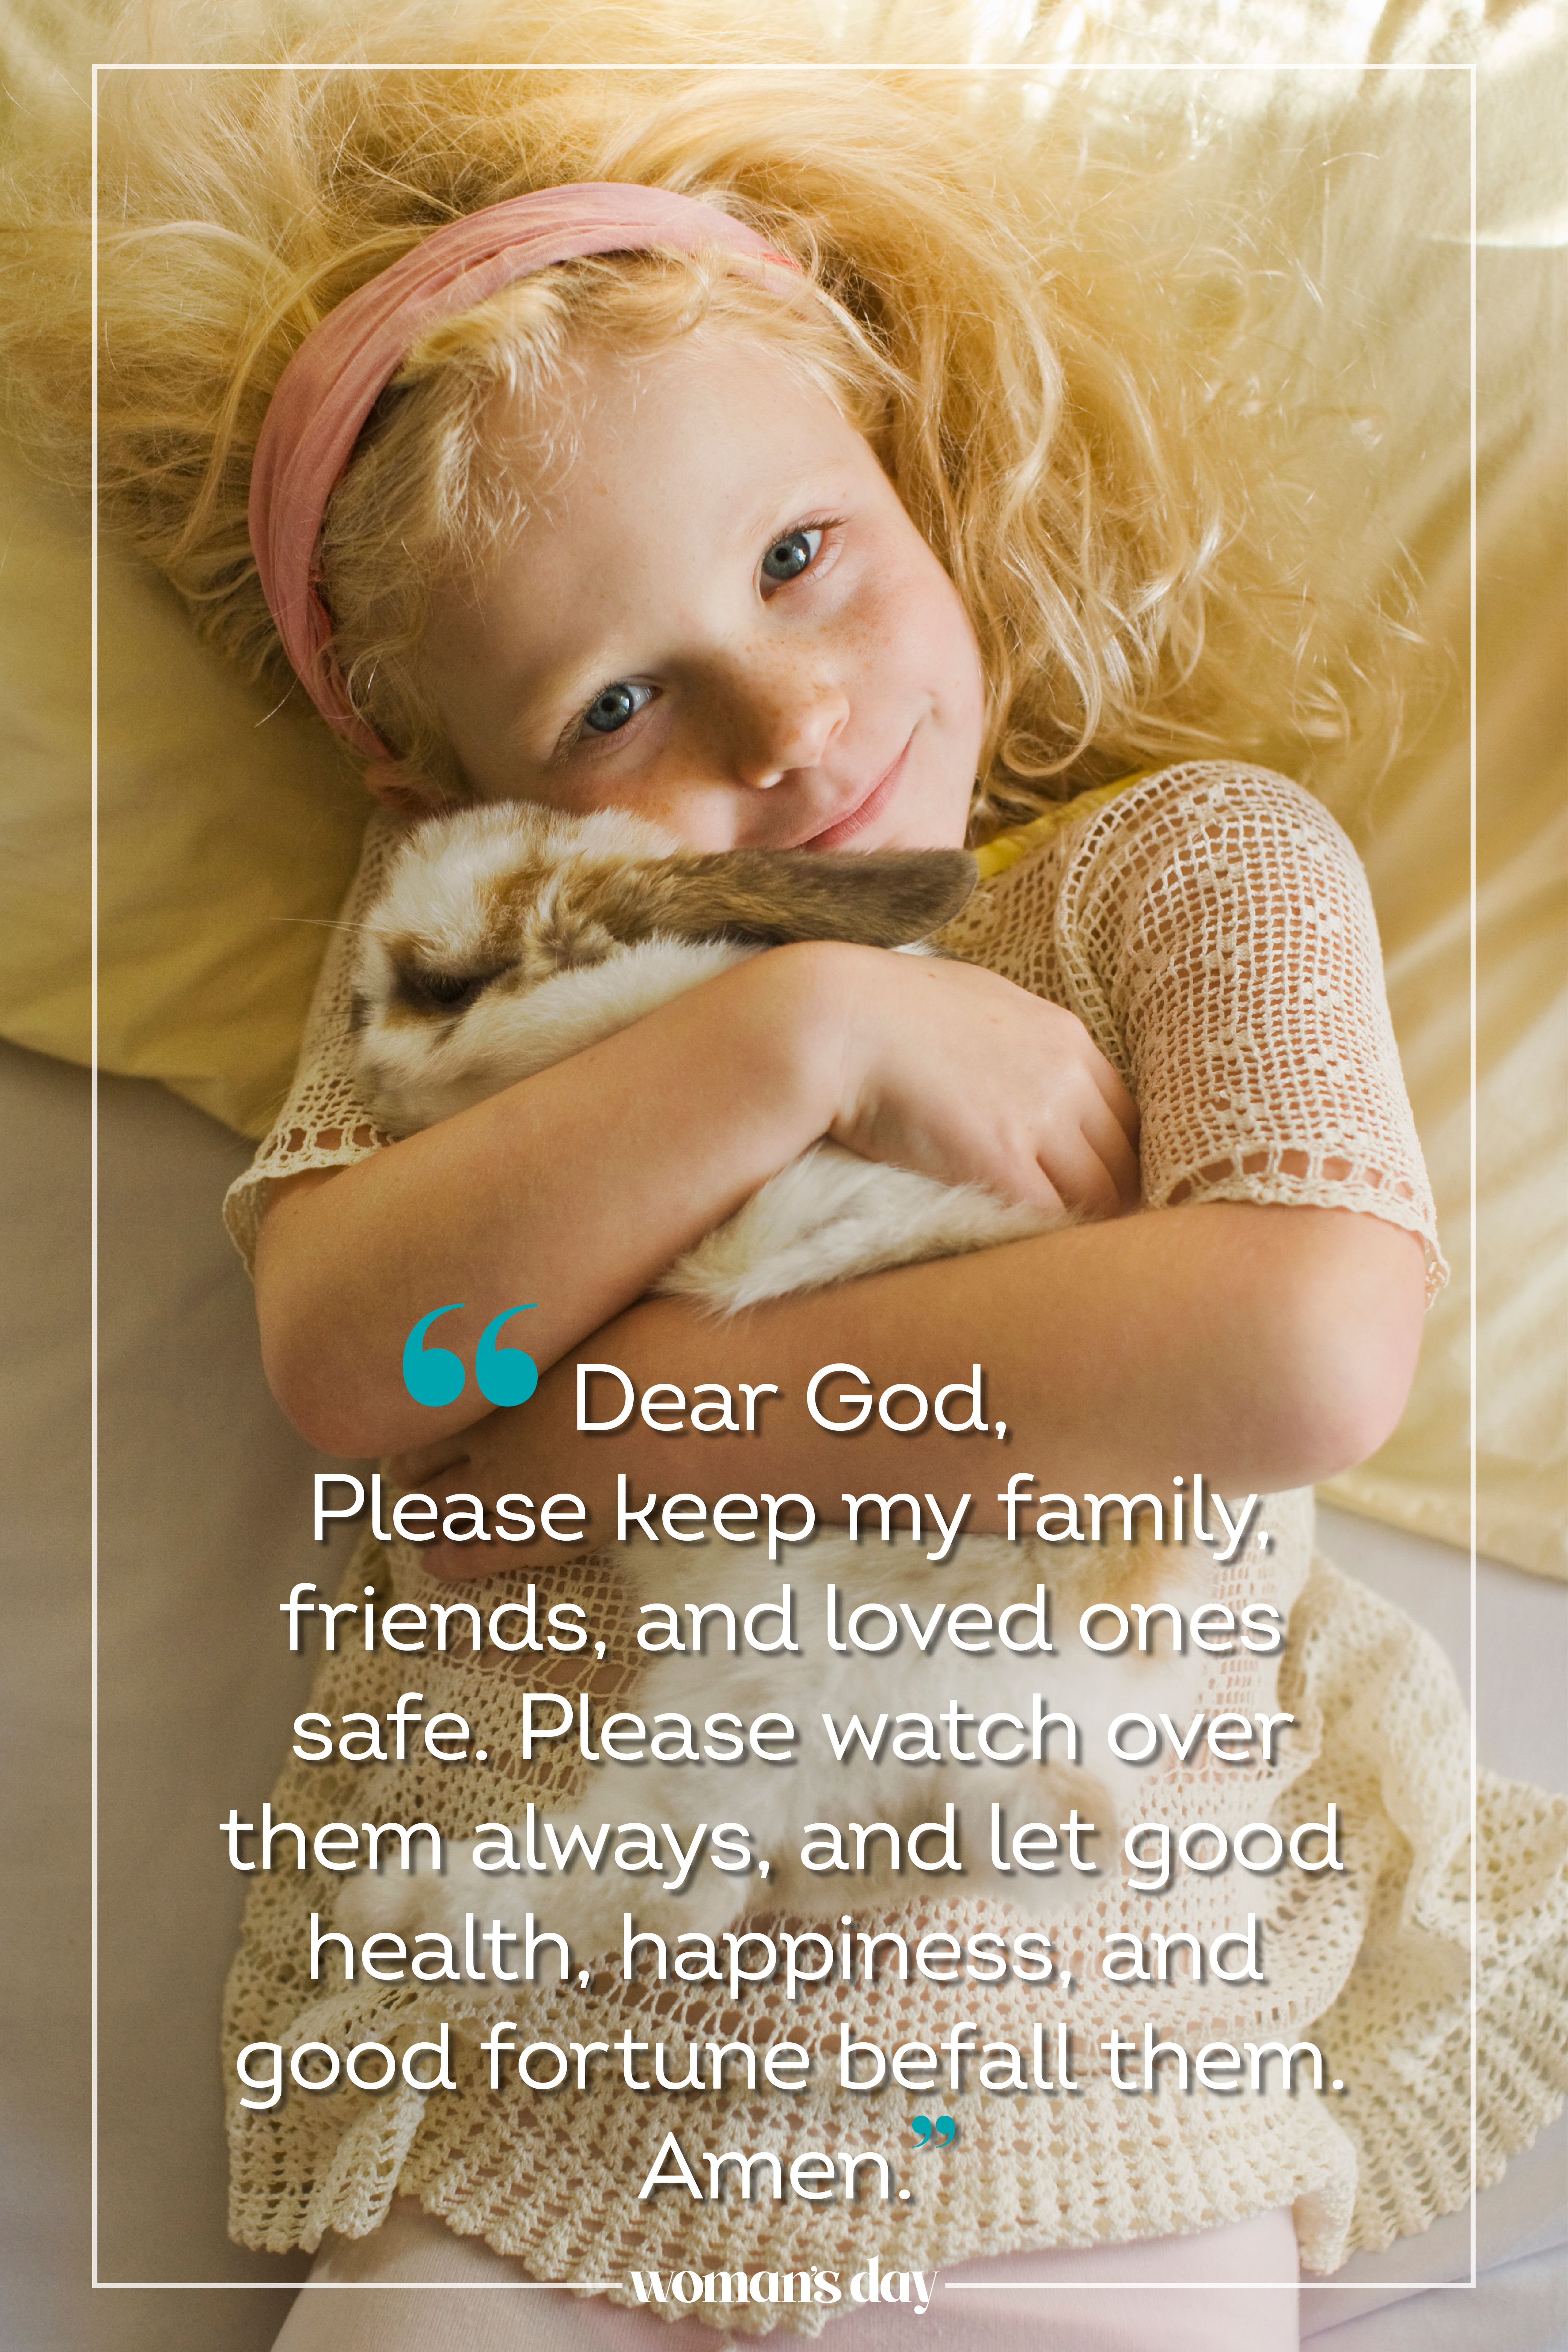 prayer for a friend in need